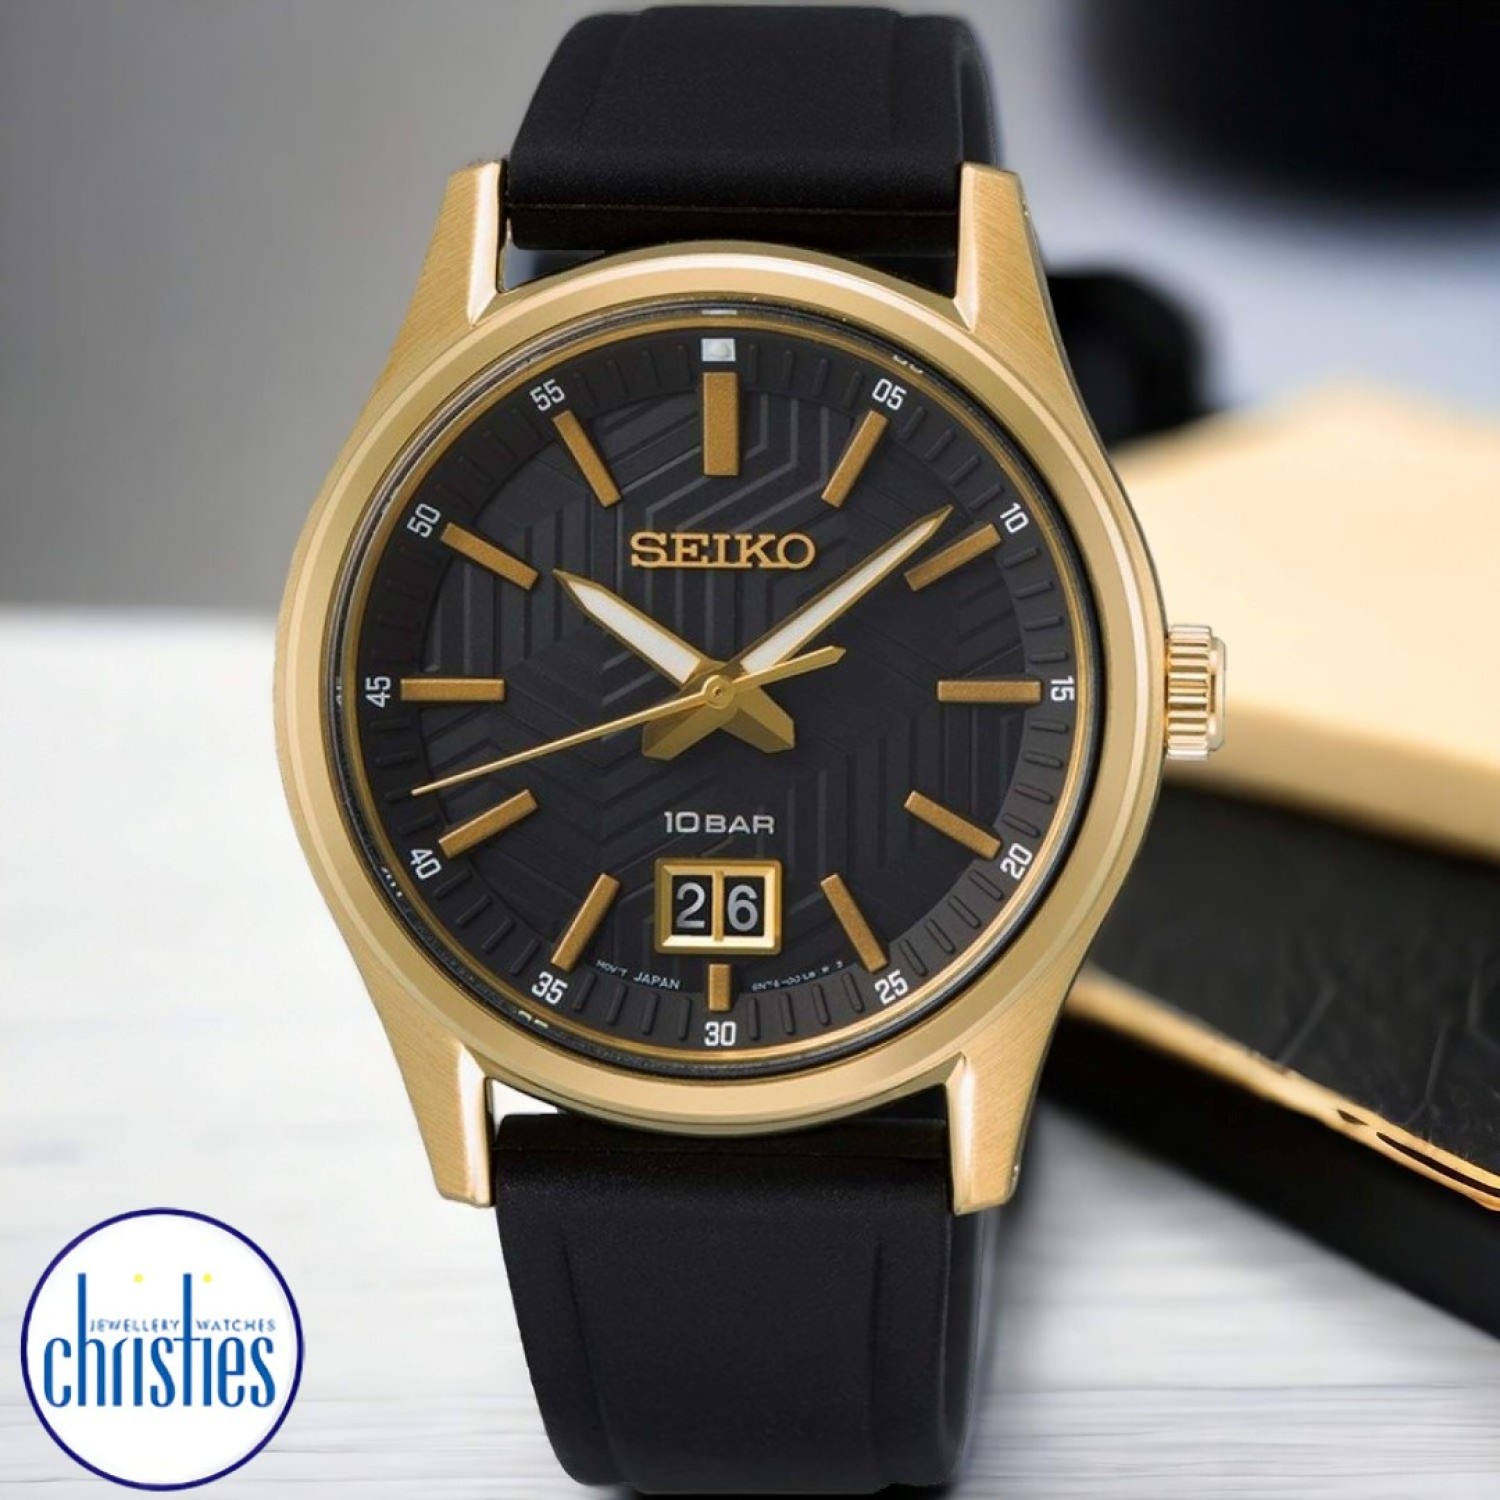 SUR450 Seiko Dress Analogue Watch SUR560P Seiko Watches NZ |  Seiko's commitment to craftsmanship ensures that each watch is made with precision and attention to detail.